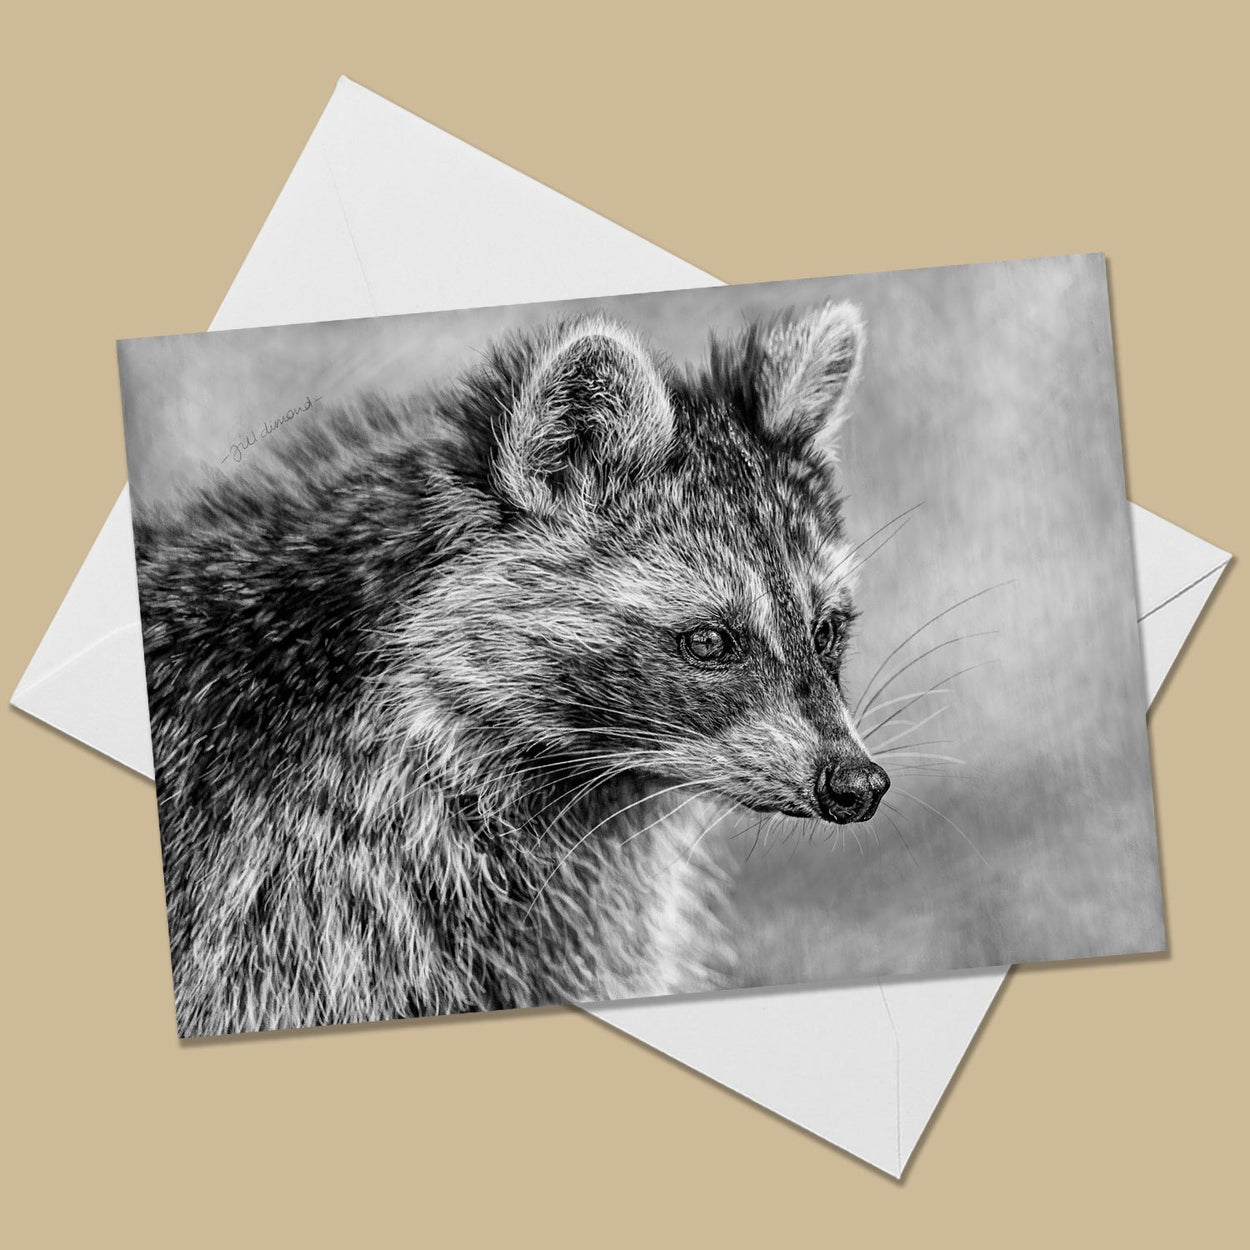 Raccoon Greeting Card - The Thriving Wild